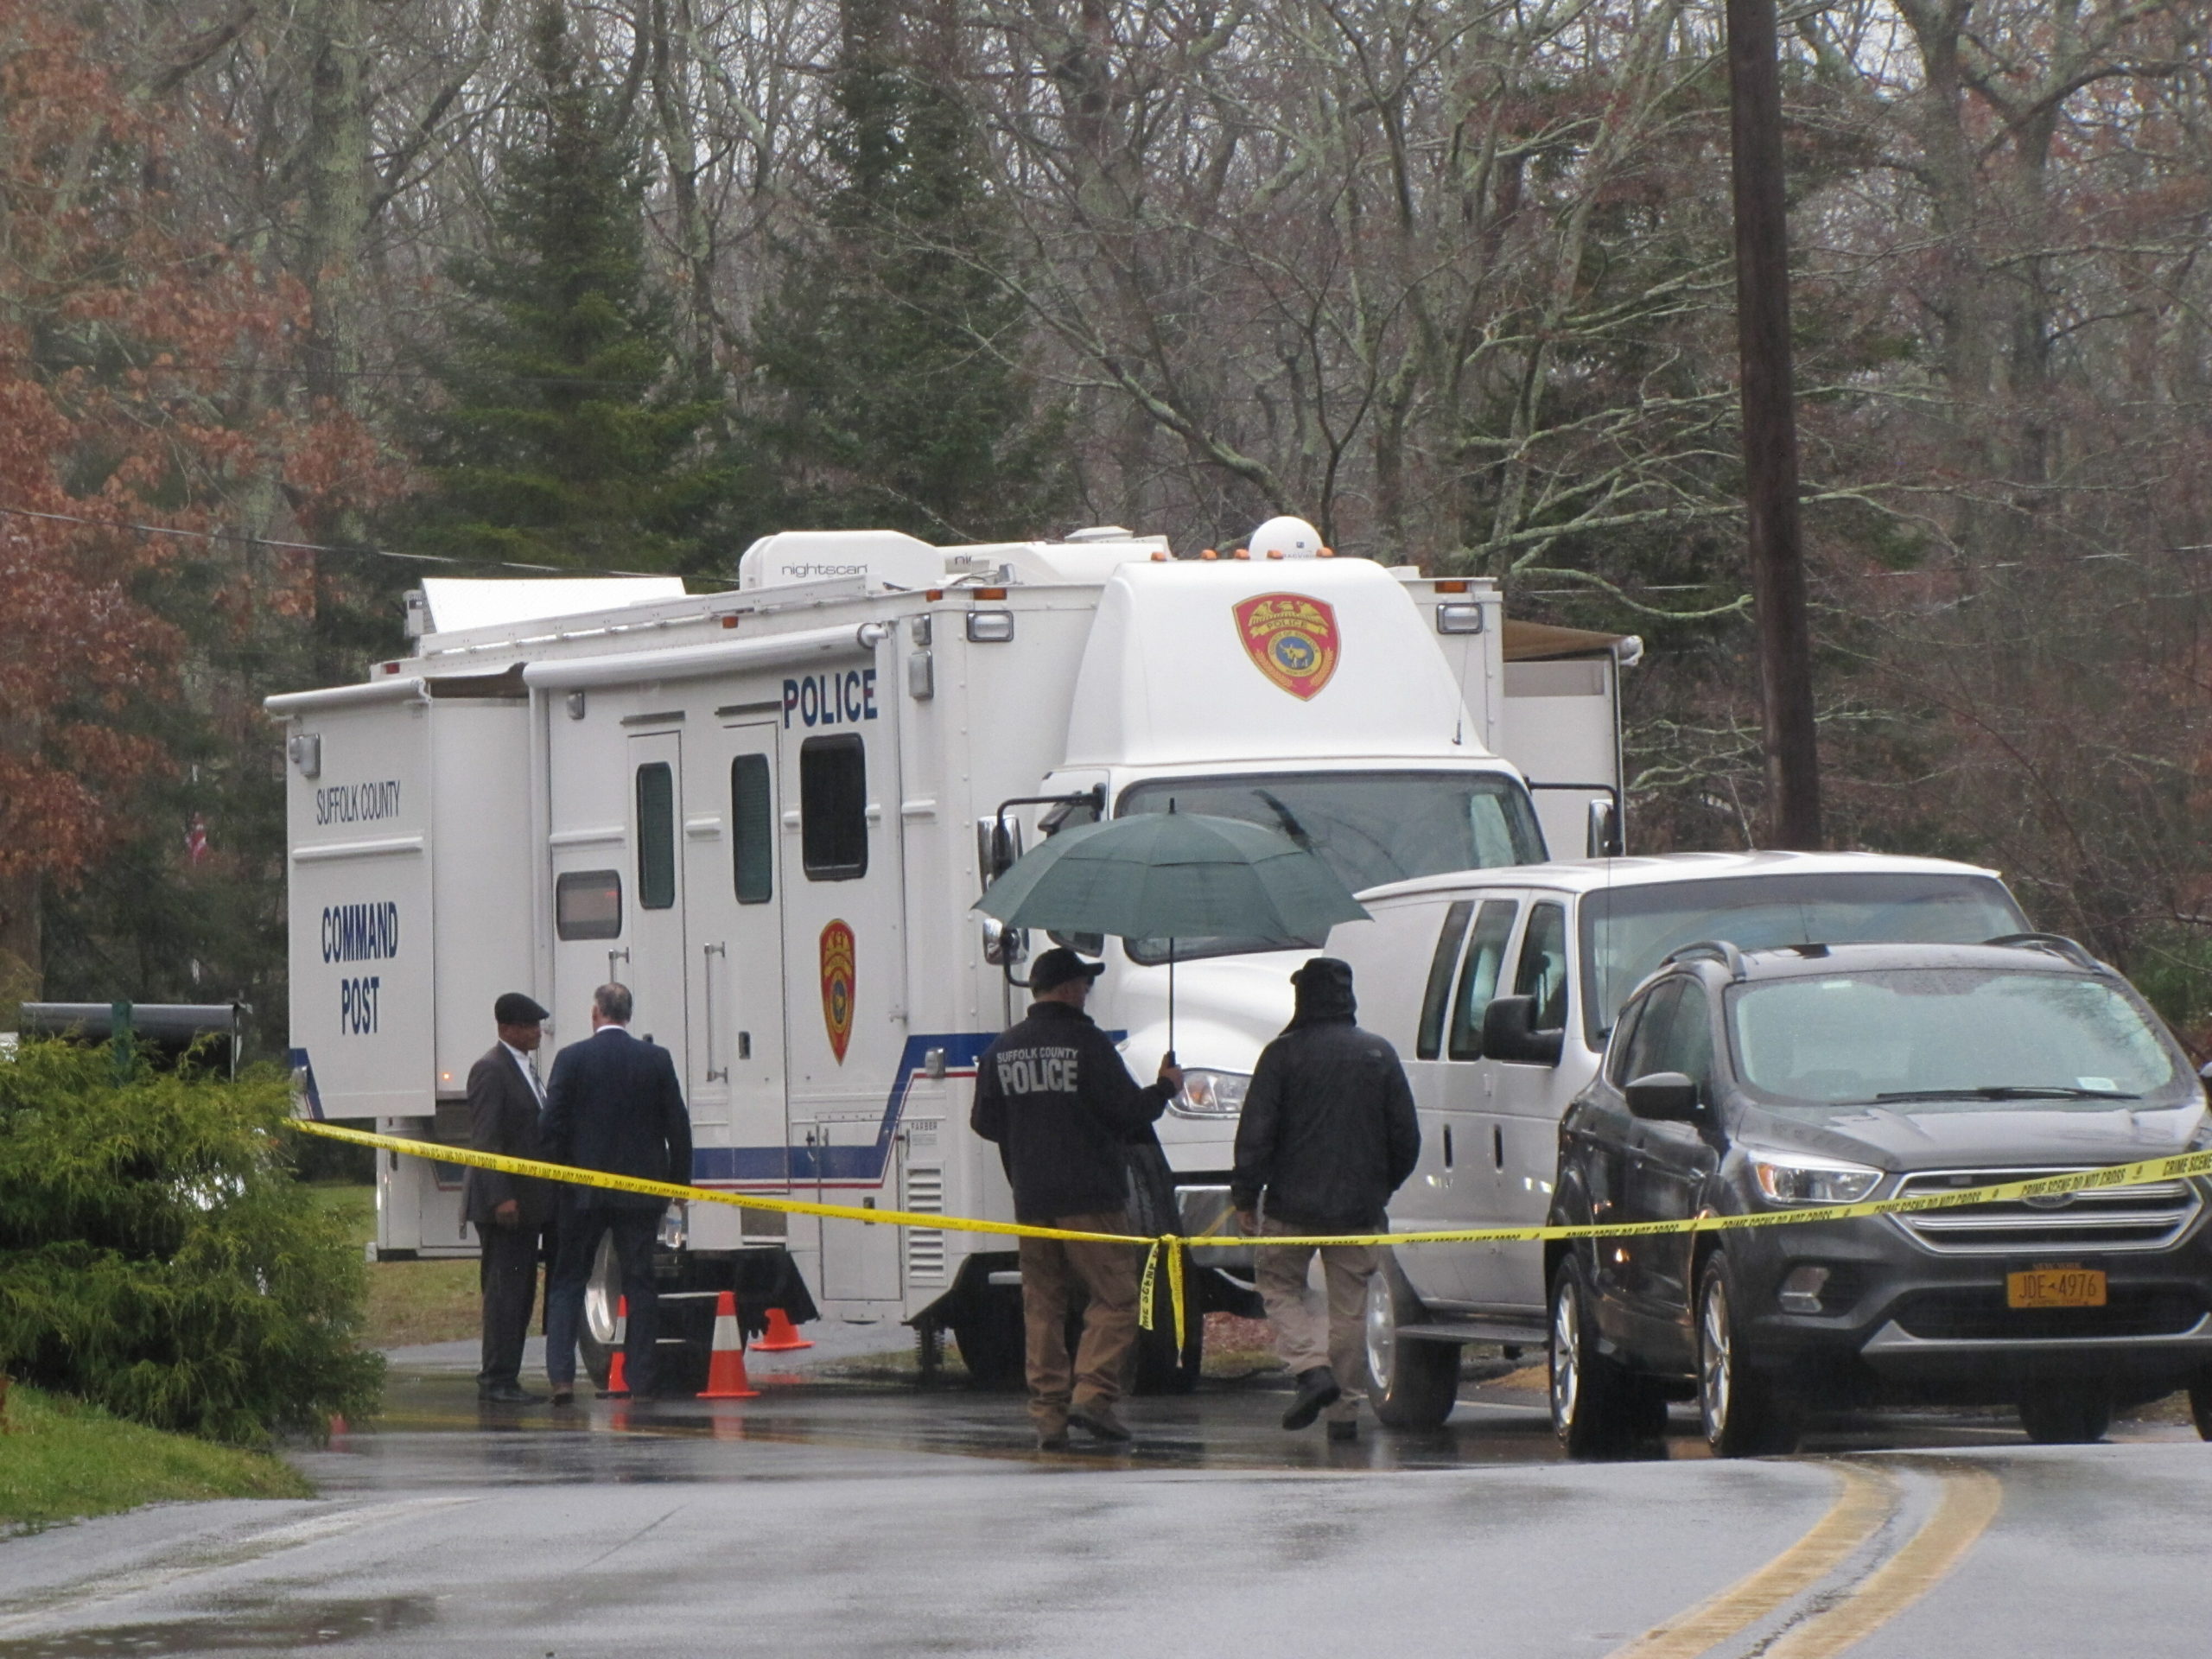 Suffolk County Police Department's homicide detectives are investigating the circumstances of the shooting that left at least one person dead.